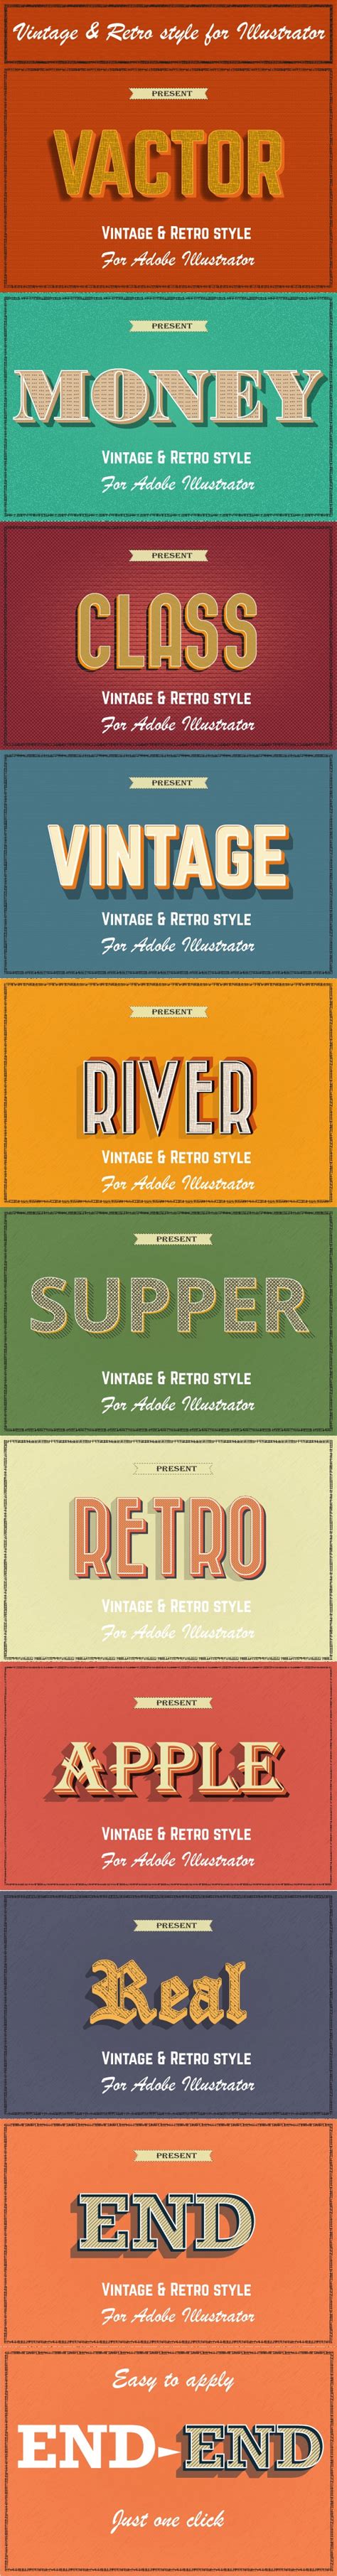 Vintage And Retro Graphic Styles For Illustrator Add Ons Graphicriver